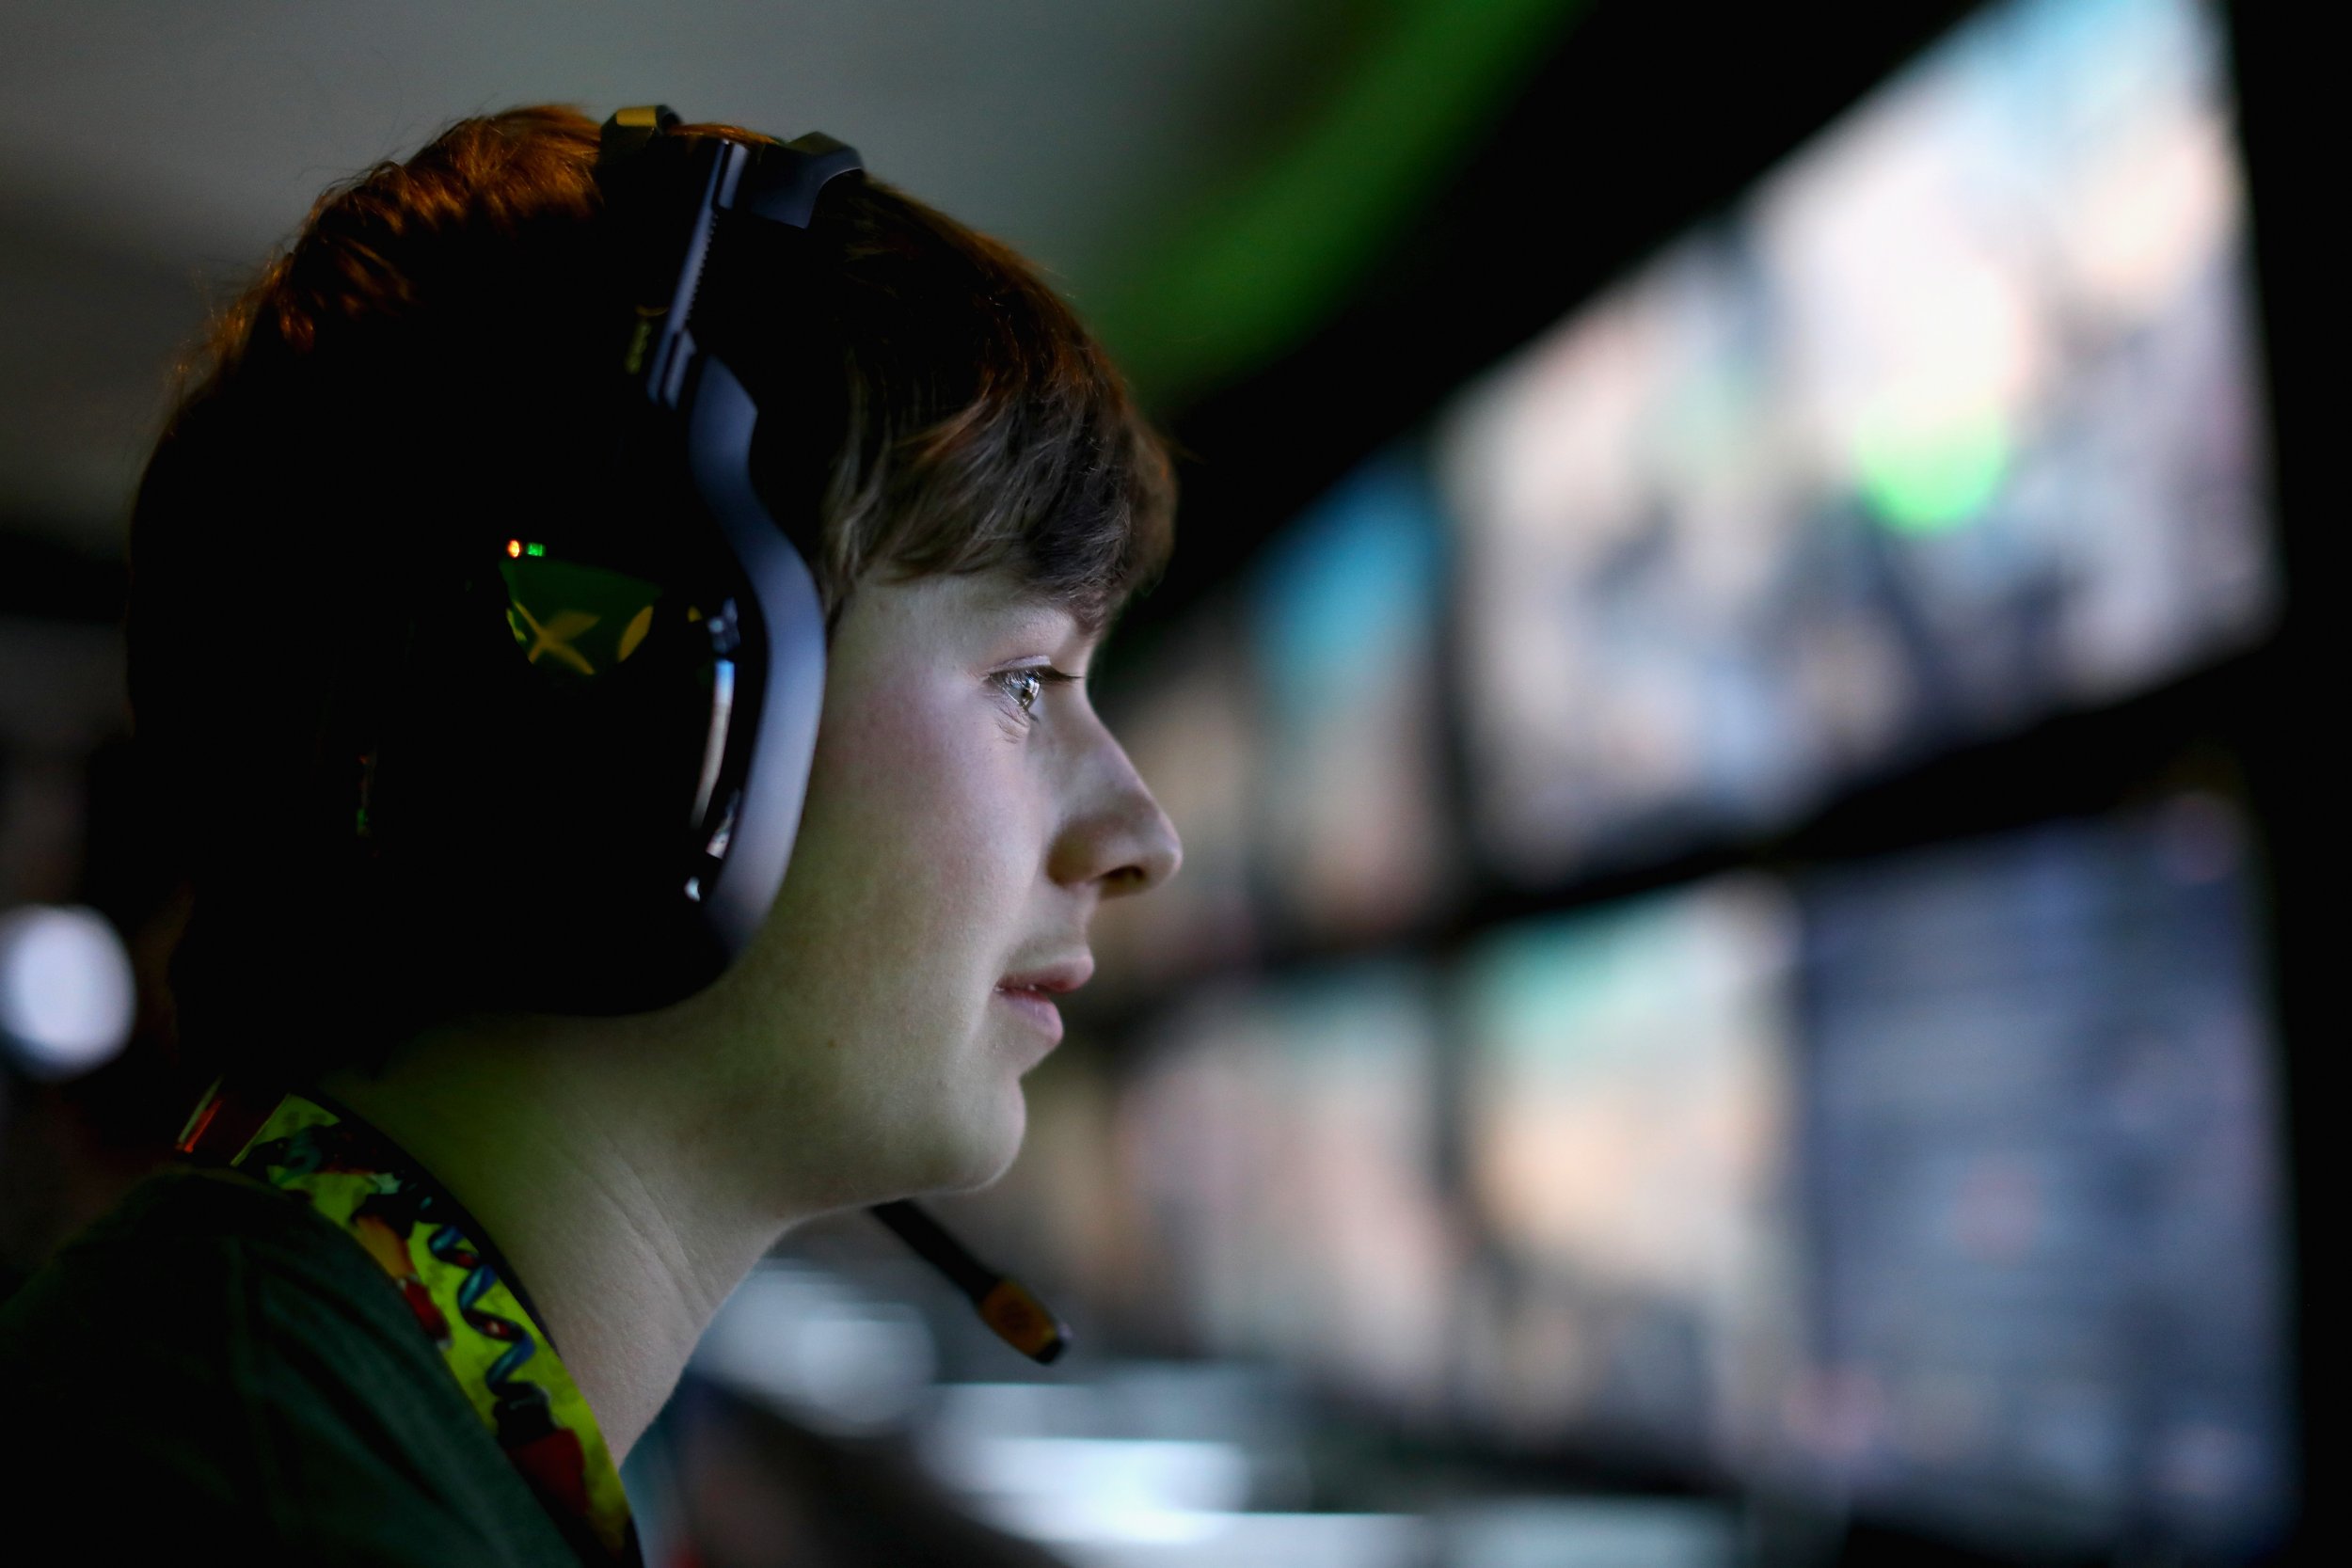 Online gaming may boost school grades: study